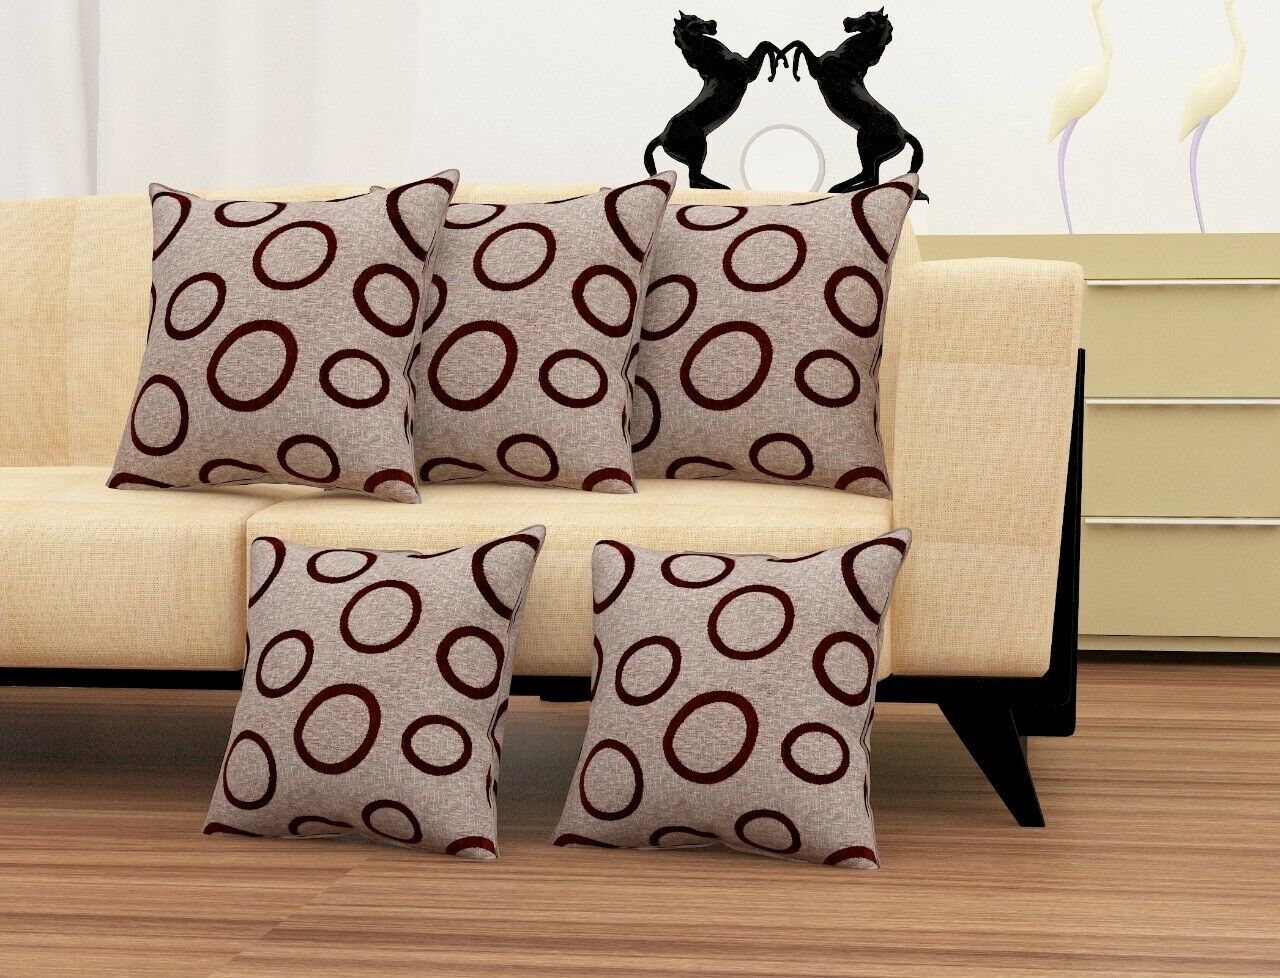 Brown Color Printed Latest Home Office Bedroom Decor Cushion Covers 5 Pieces Set